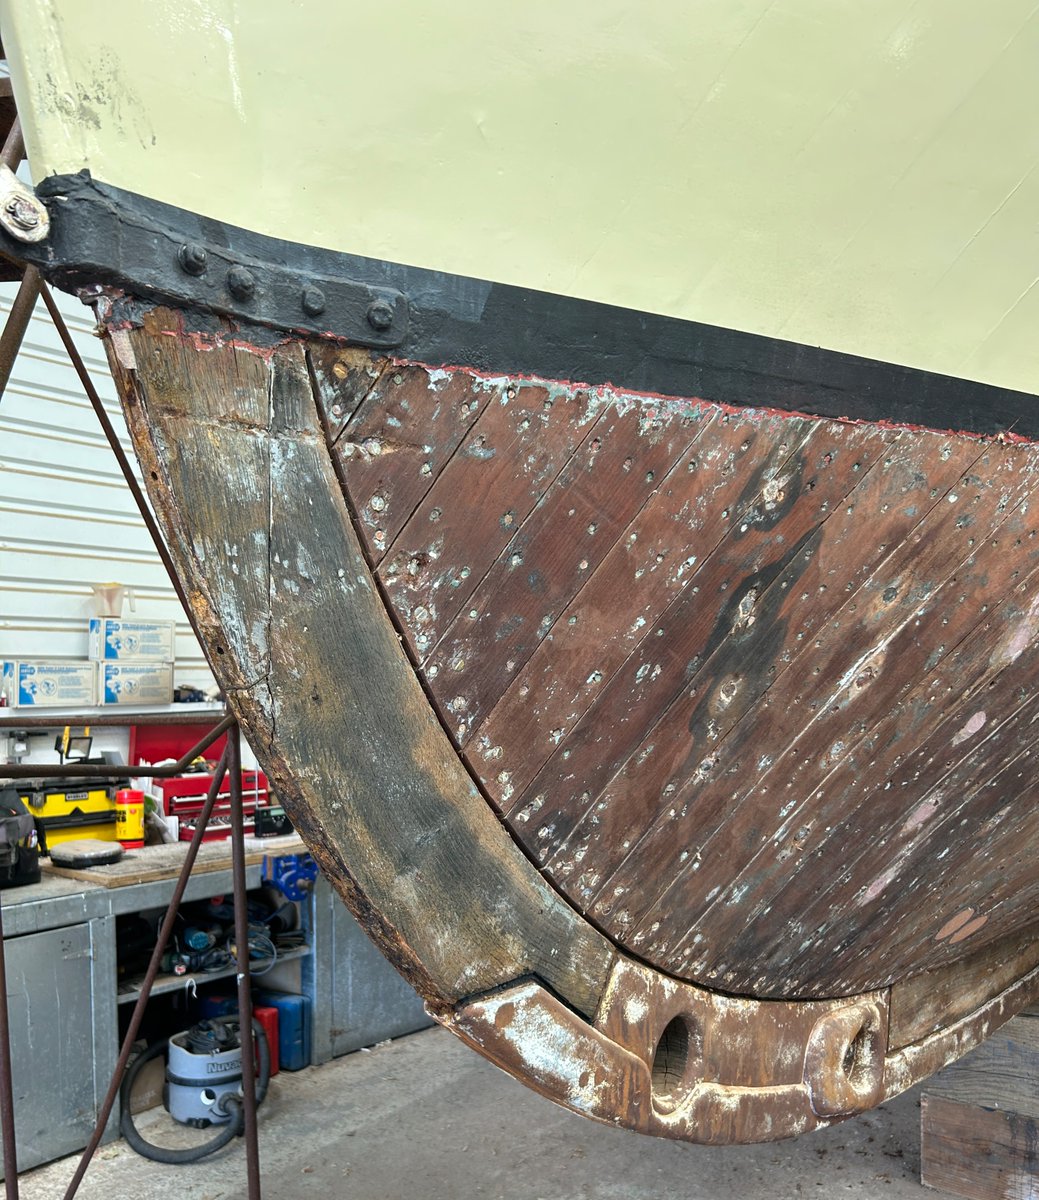 This is Swn Y Mor. She was built back in 1935 and is a 46ft Watson Class Lifeboat.               
Here she is being sheathed with WEST SYSTEM® Epoxy. 
Levington Marina, Suffolkyachtharbor⚓ 

#westsystemepoxy #boatrefit #boatrepair #maritimehistory